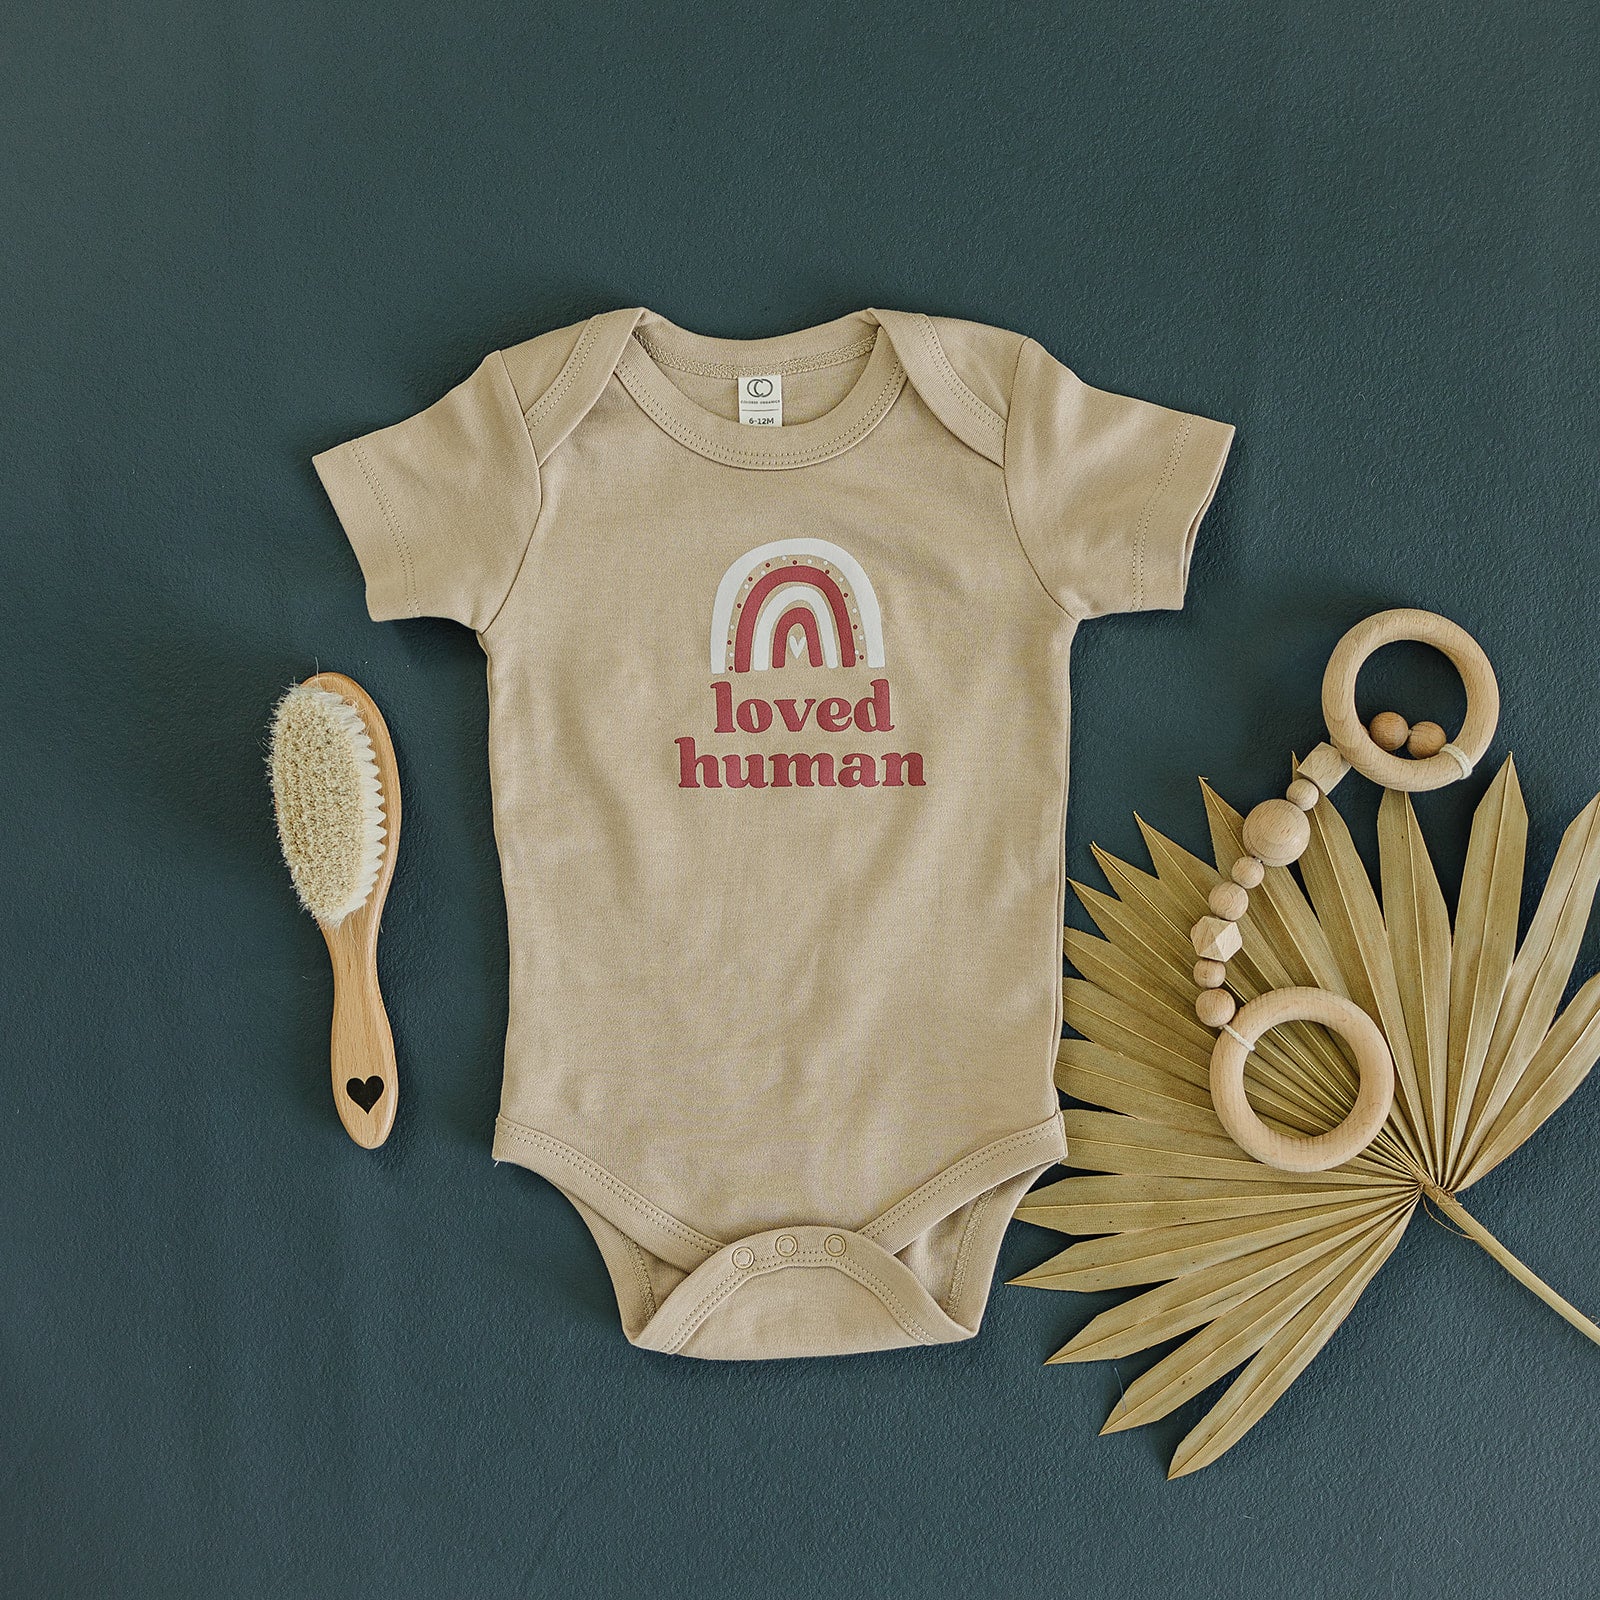 Neutral-toned baby onesie with 'loved human' and rainbow print, alongside a natural bristle brush and wooden teething rings on a dark teal background